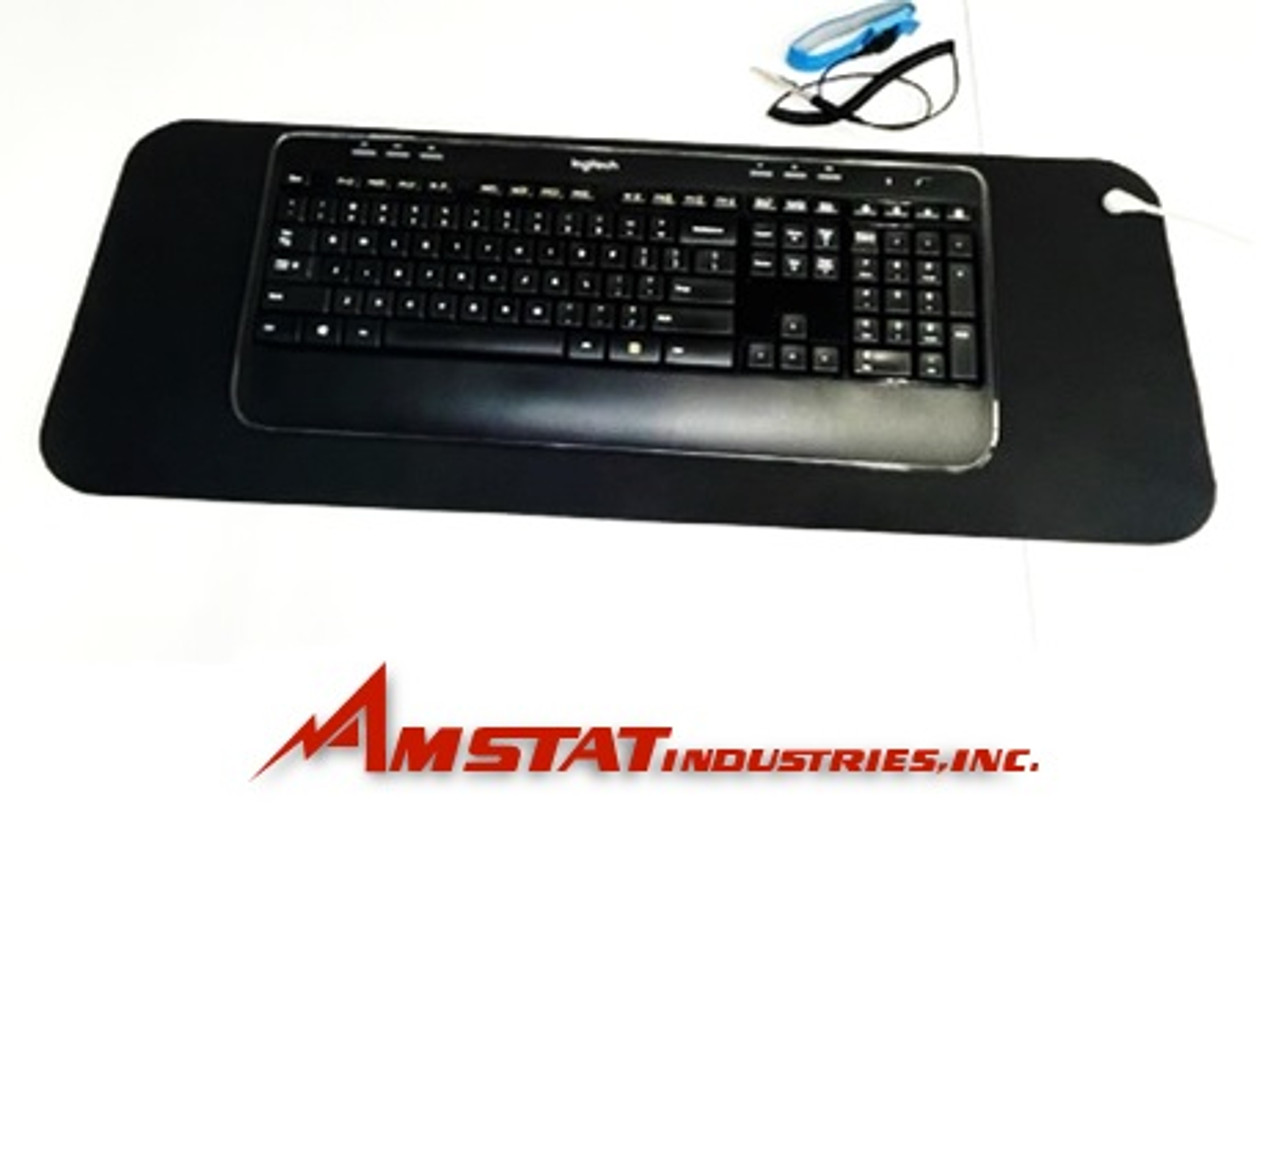 Anti-Static Grounded Keyboard Pad